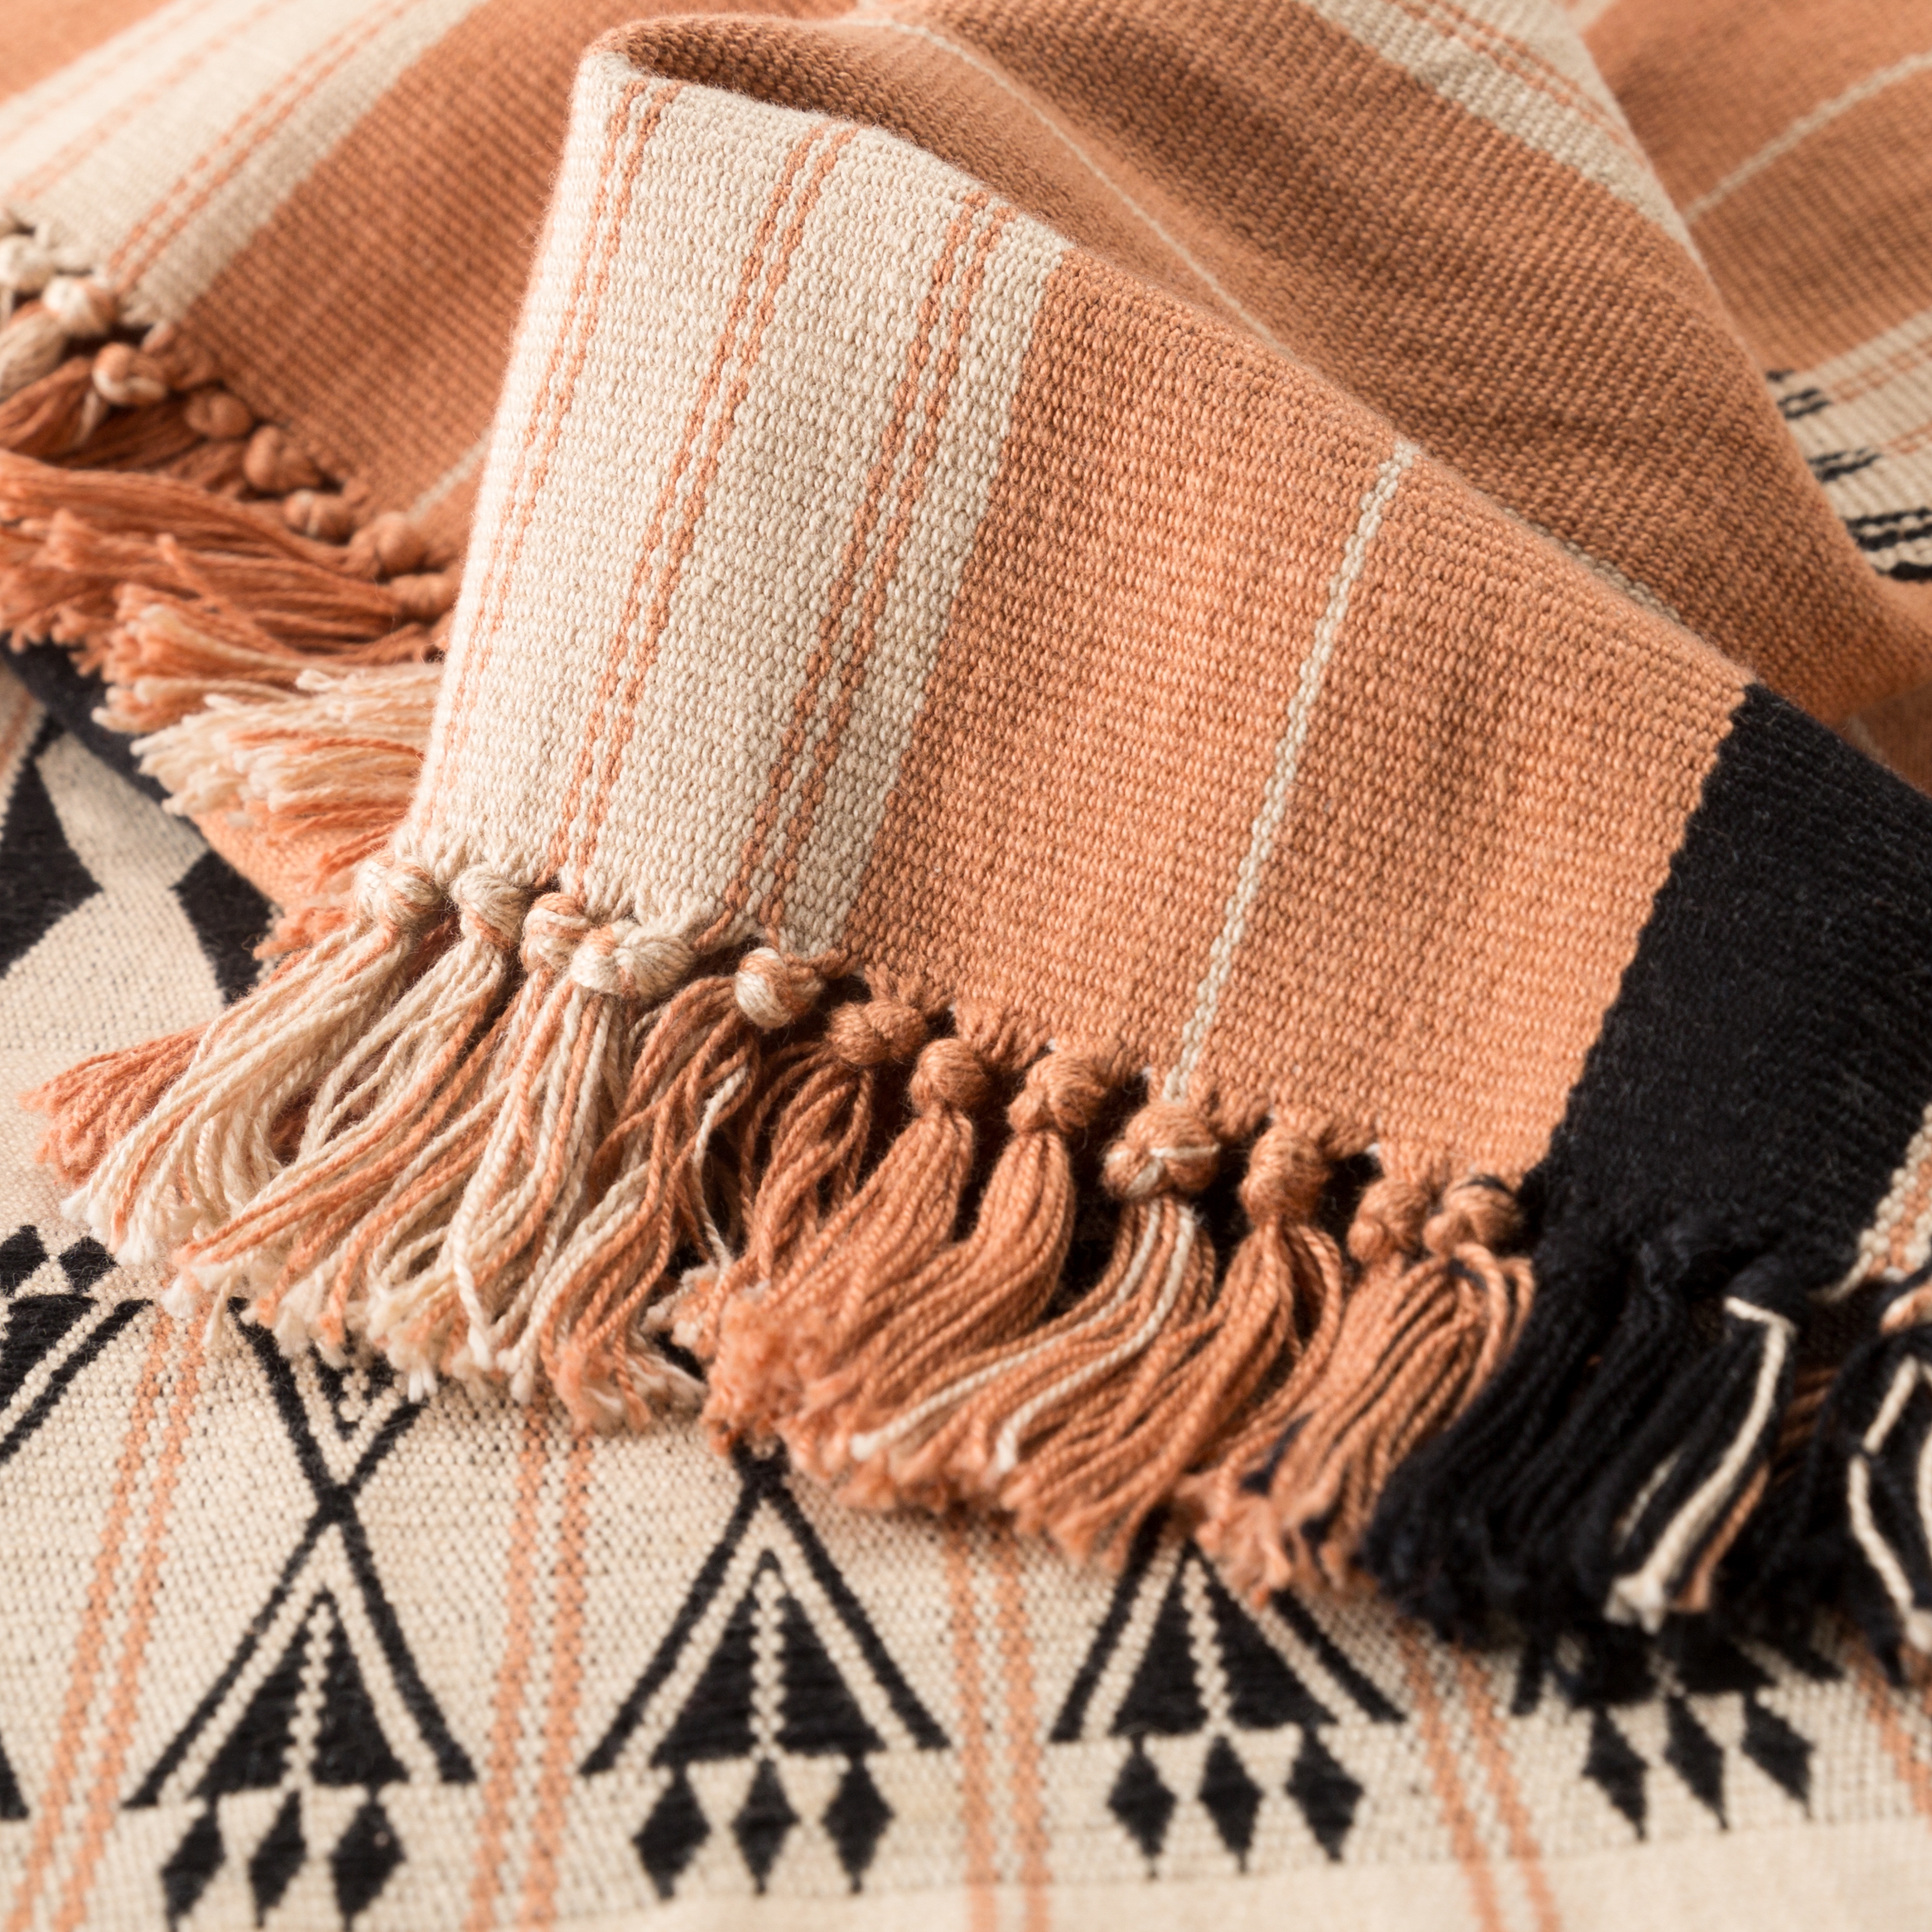 Chang Hand-Loomed Tribal Blush/ Beige Throw - Image 1